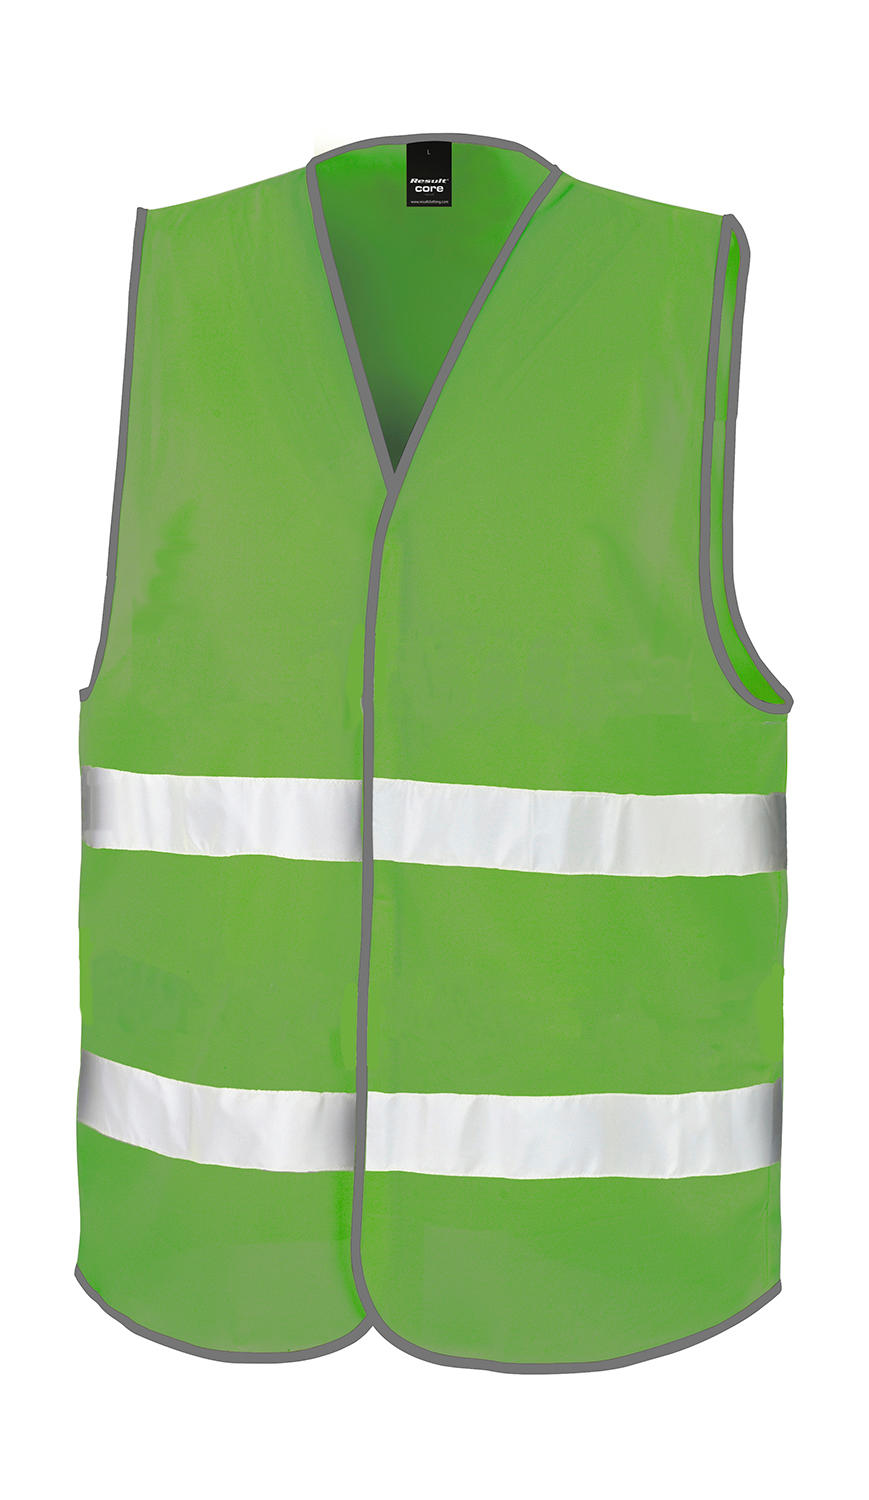  Core Enhanced Visibility Vest in Farbe Lime